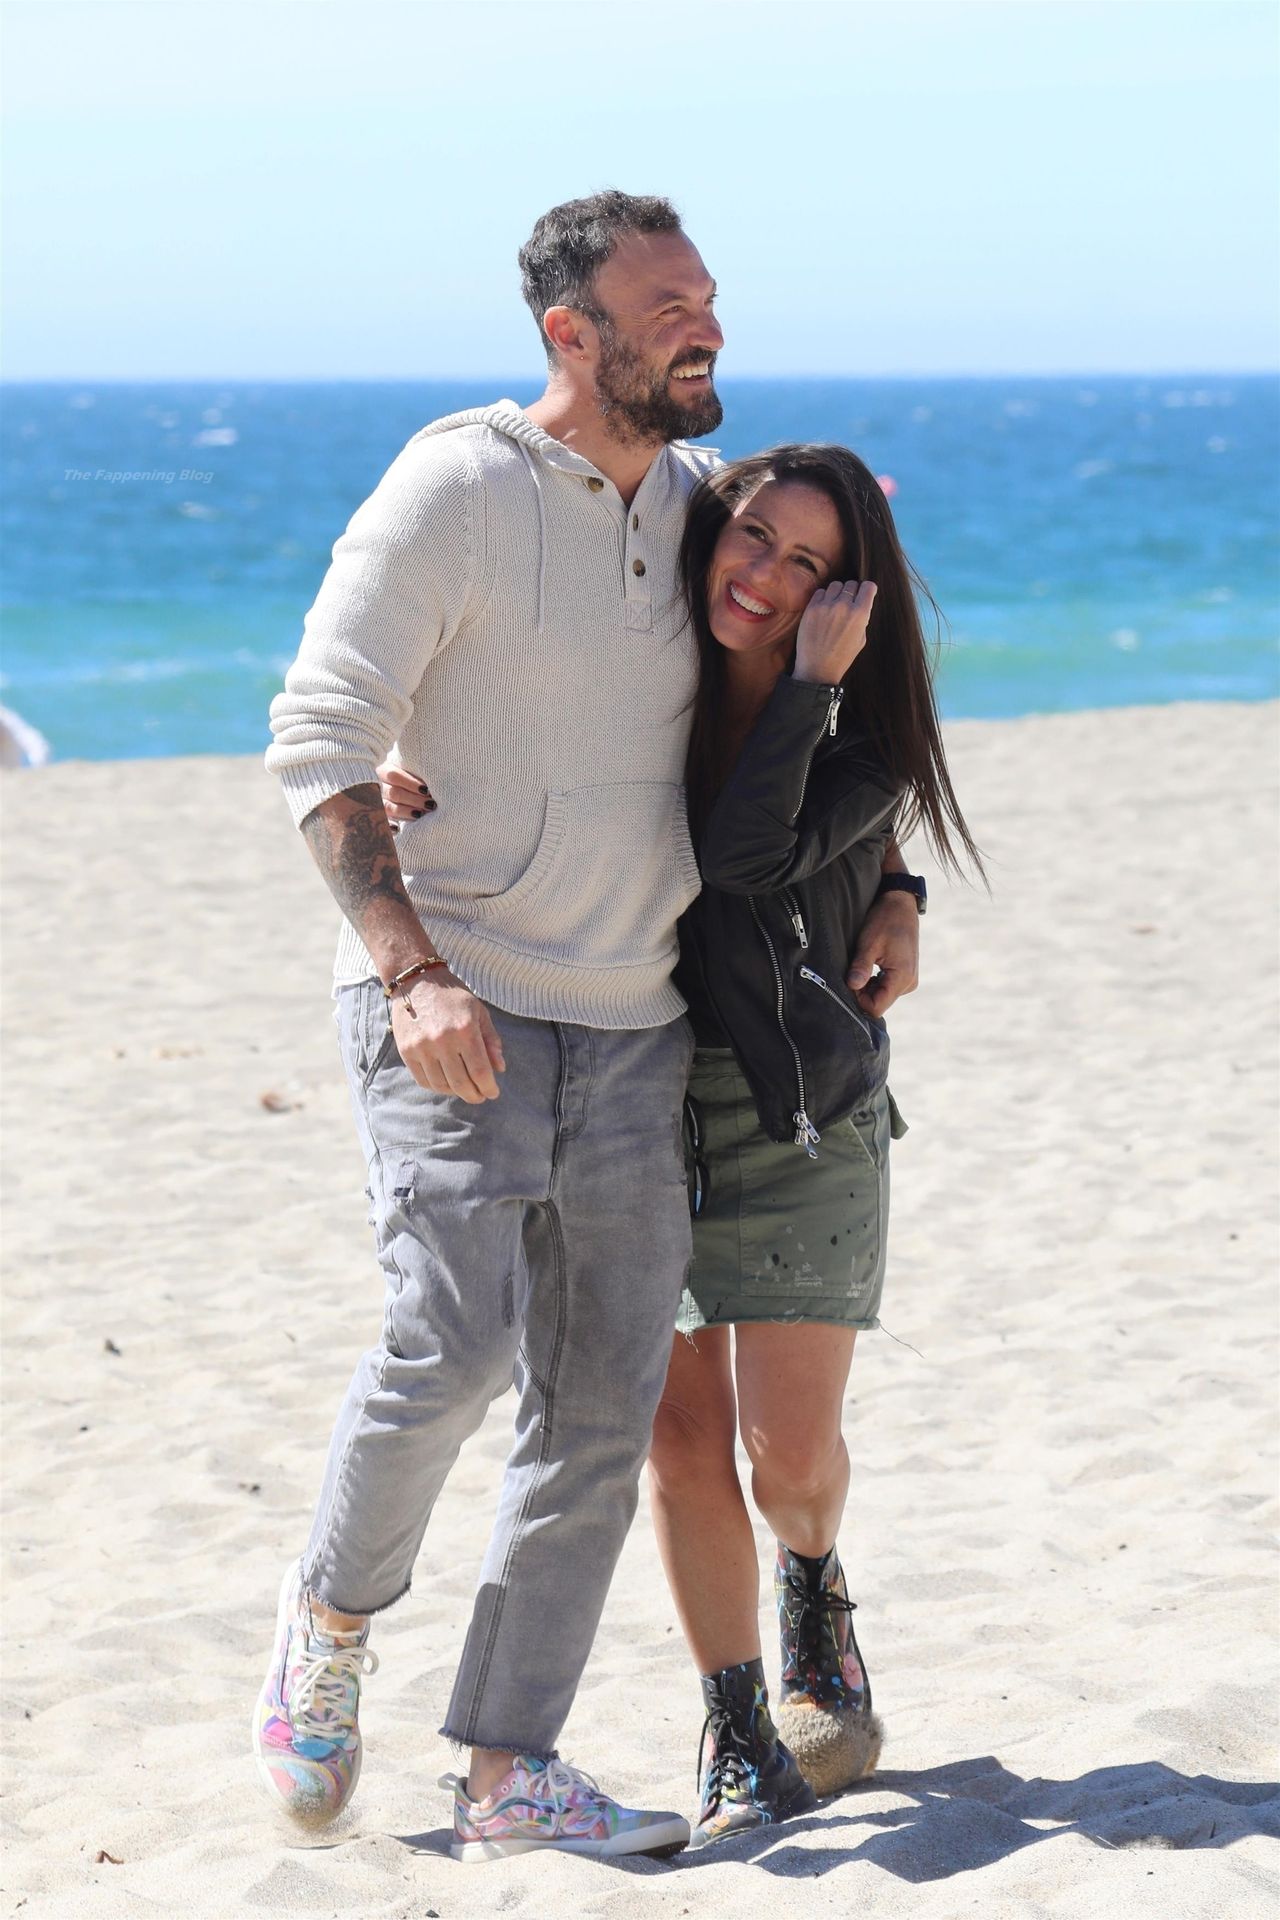 Soleil Moon Frye & Brian Austin Green Have a Great Time in Ma
libu (82 Photos)